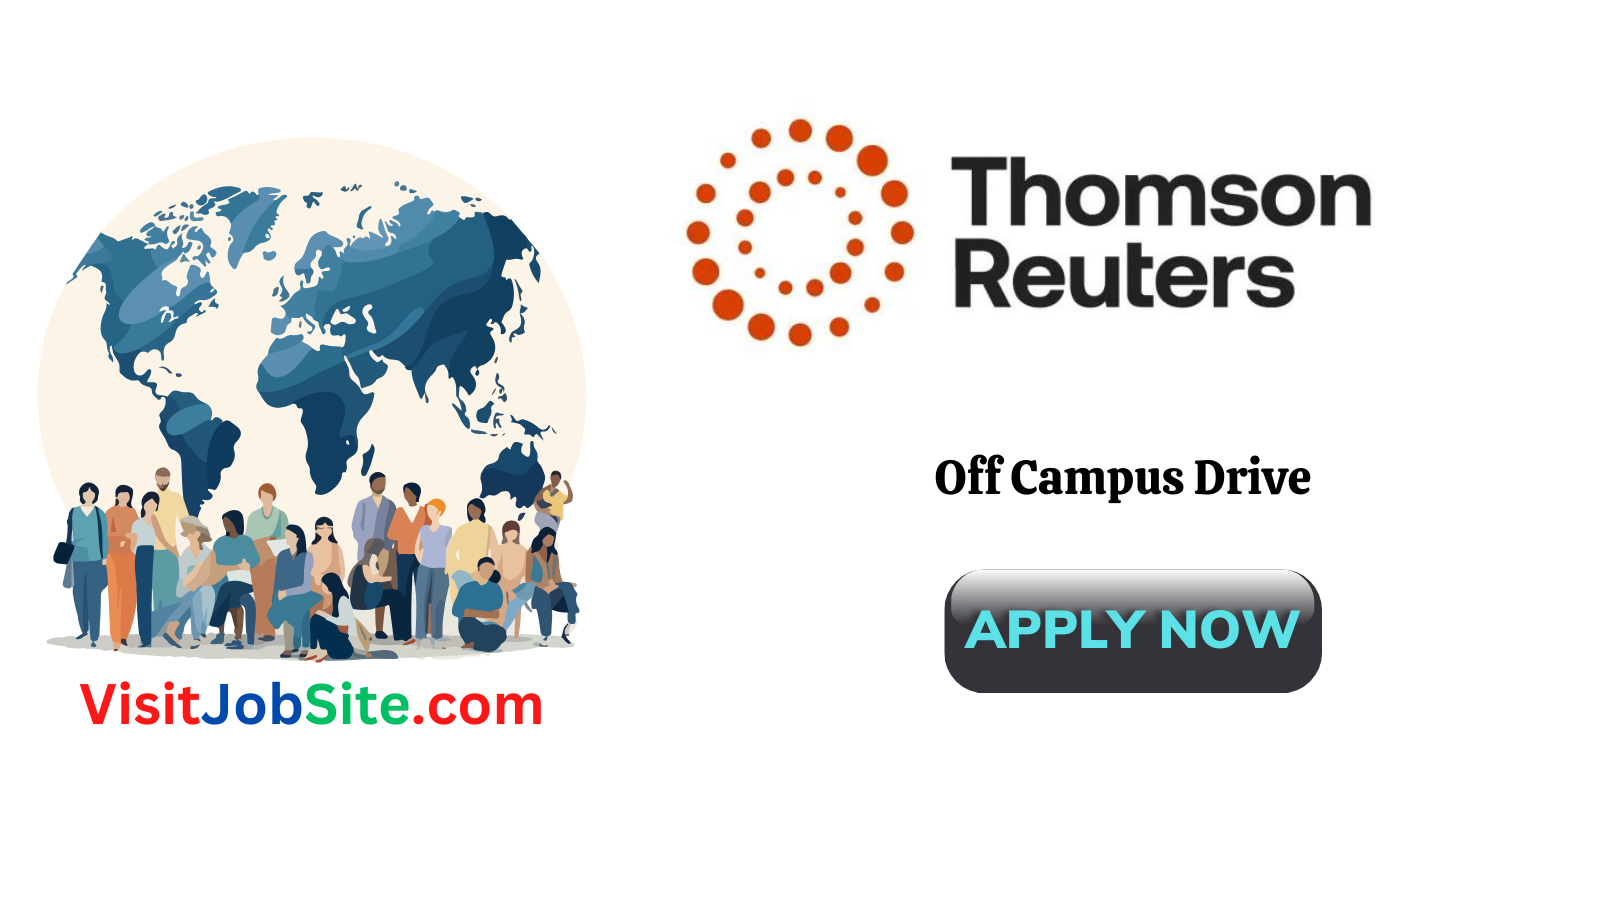 Thomson Reuters Off Campus Drive